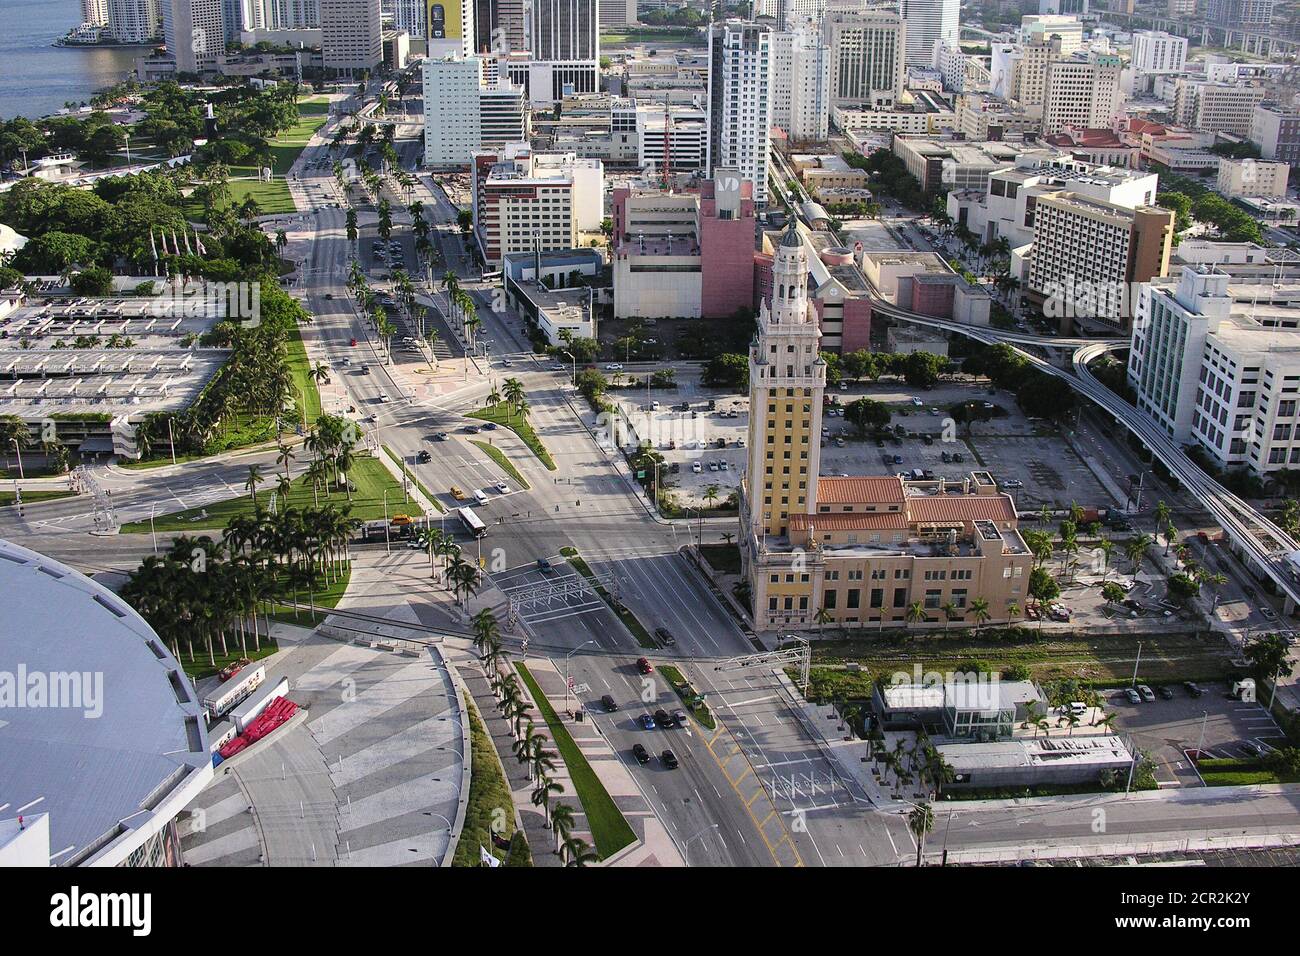 Miami, Florida, USA - September 2005:  Archival view of the historic Freedom Tower building and Miami Dade College on Biscayne Boulevard. Stock Photo